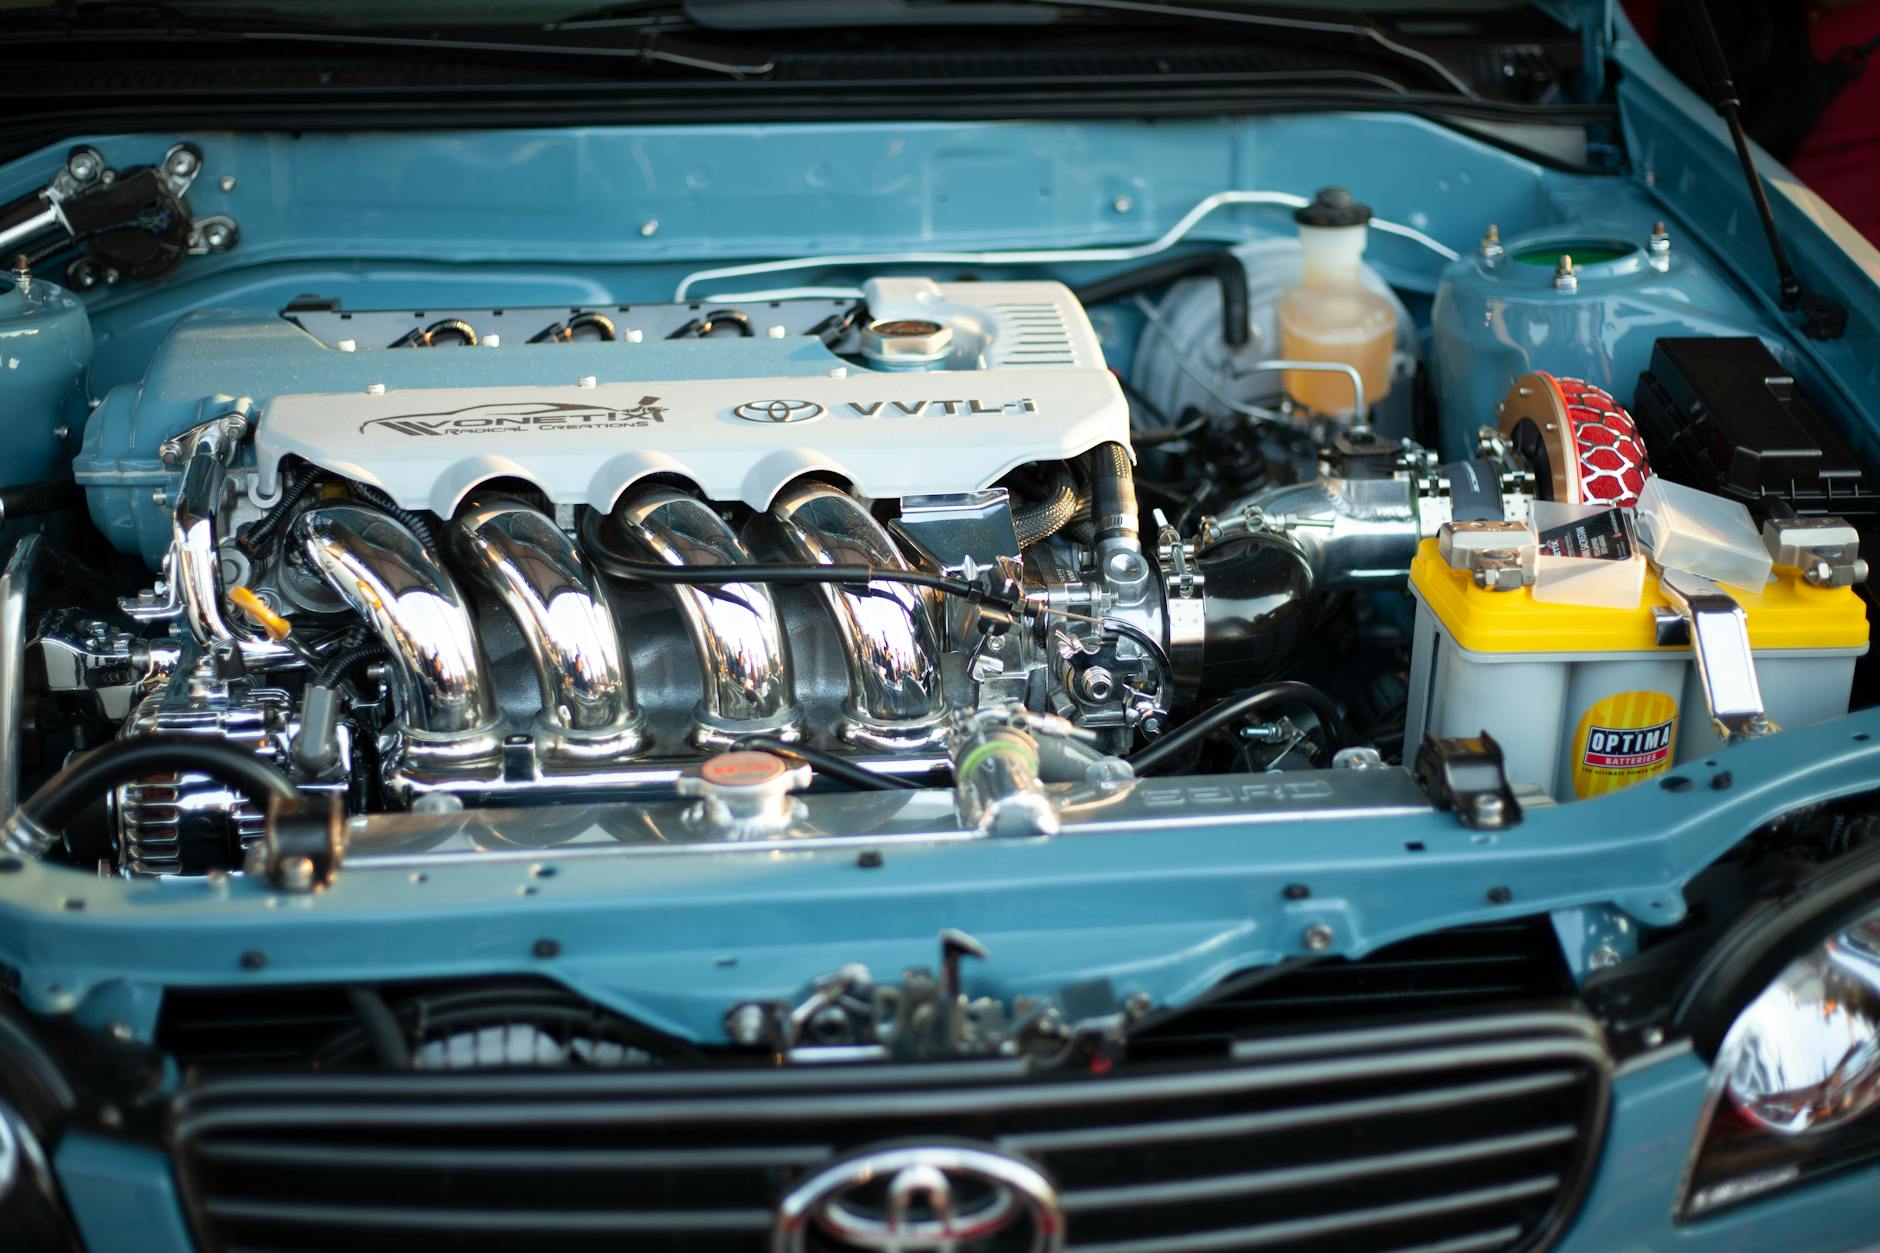 Maintain your car's engines fluids frequently during lockdown